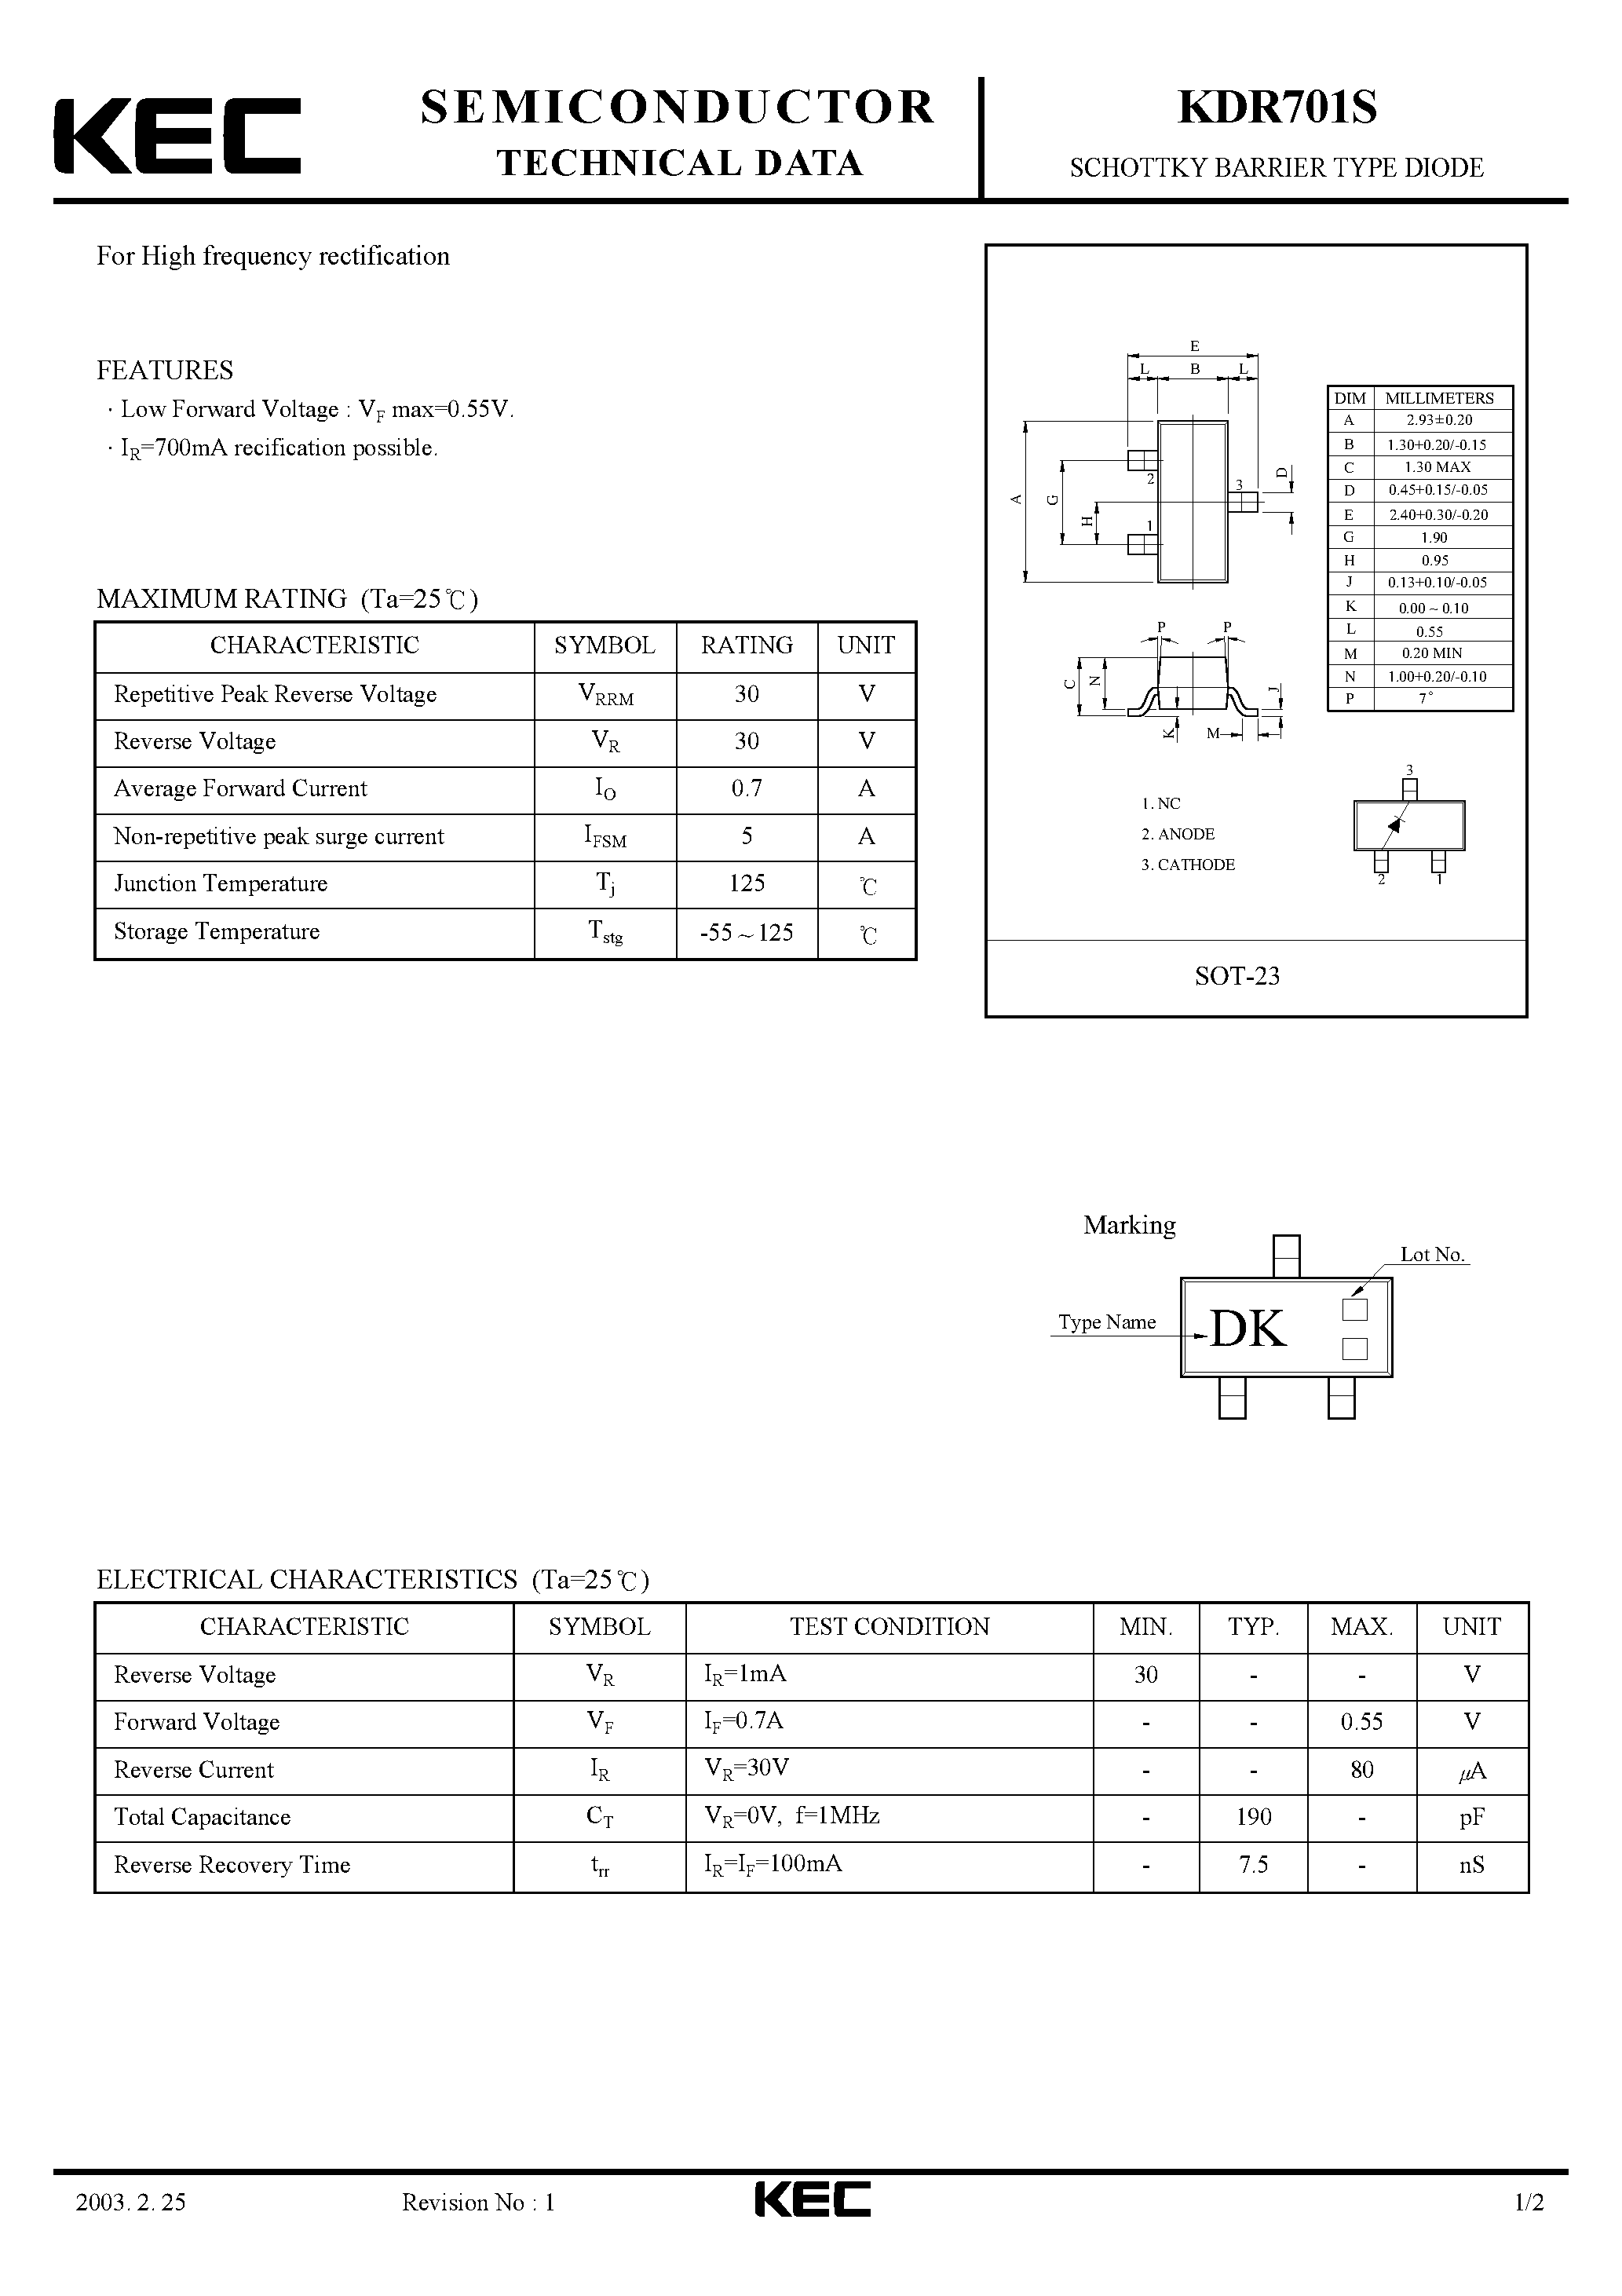 Datasheet KDR701S - SCHOTTKY BARRIER TYPE DIODE(FOR HIGH FREQUENCY RECTIFICATION) page 1